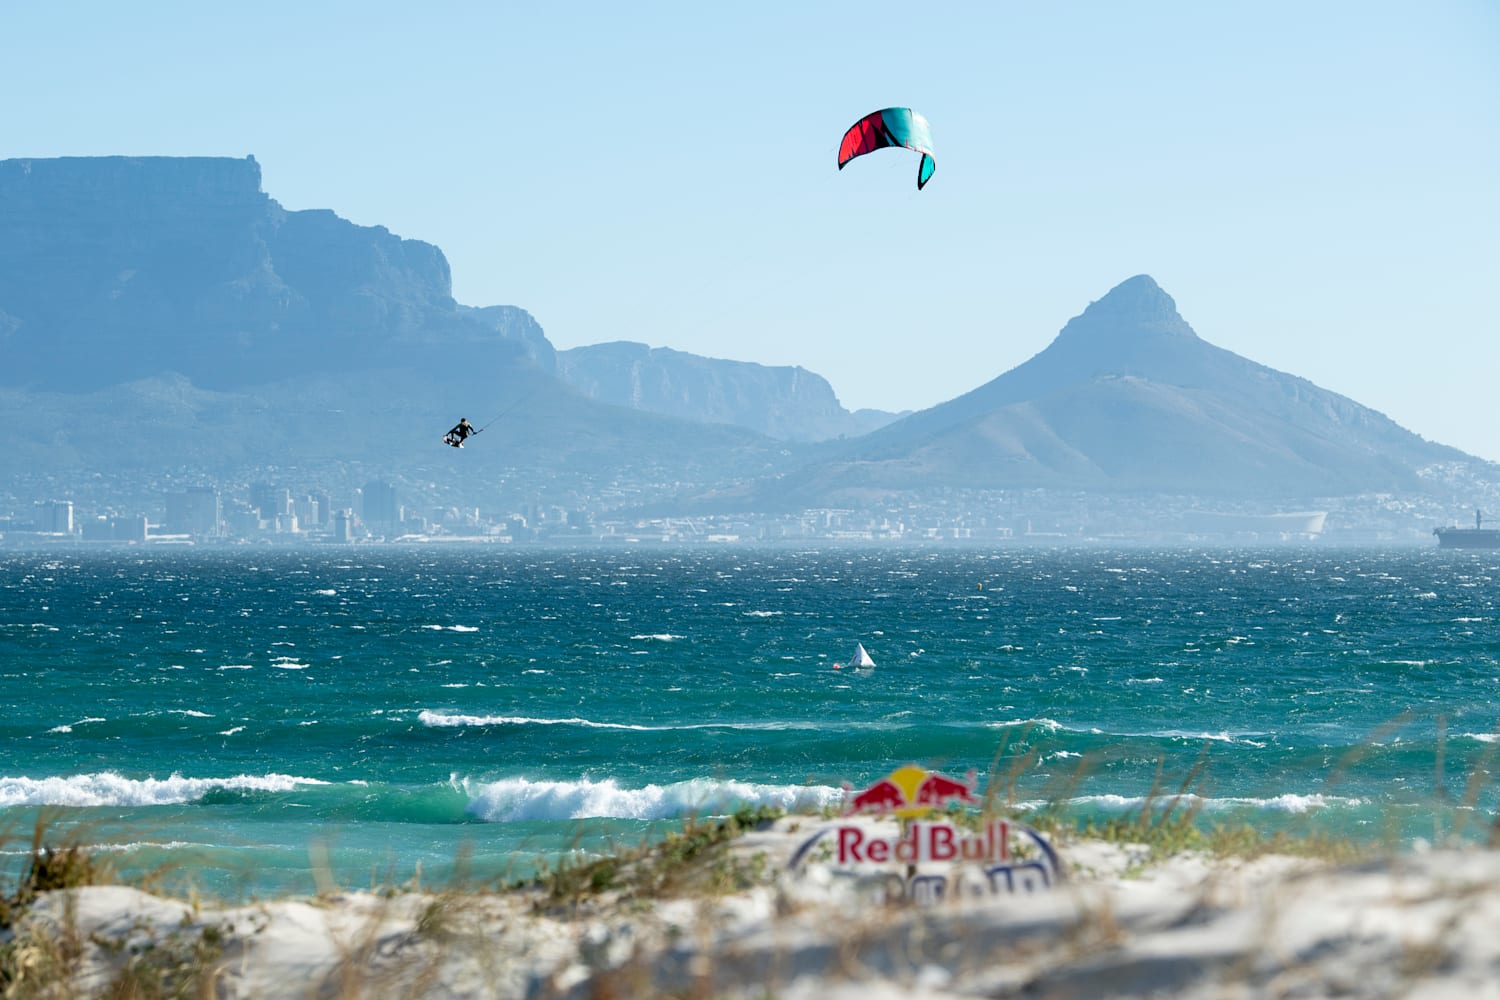 Red Bull King of the Air 2020 event info & videos